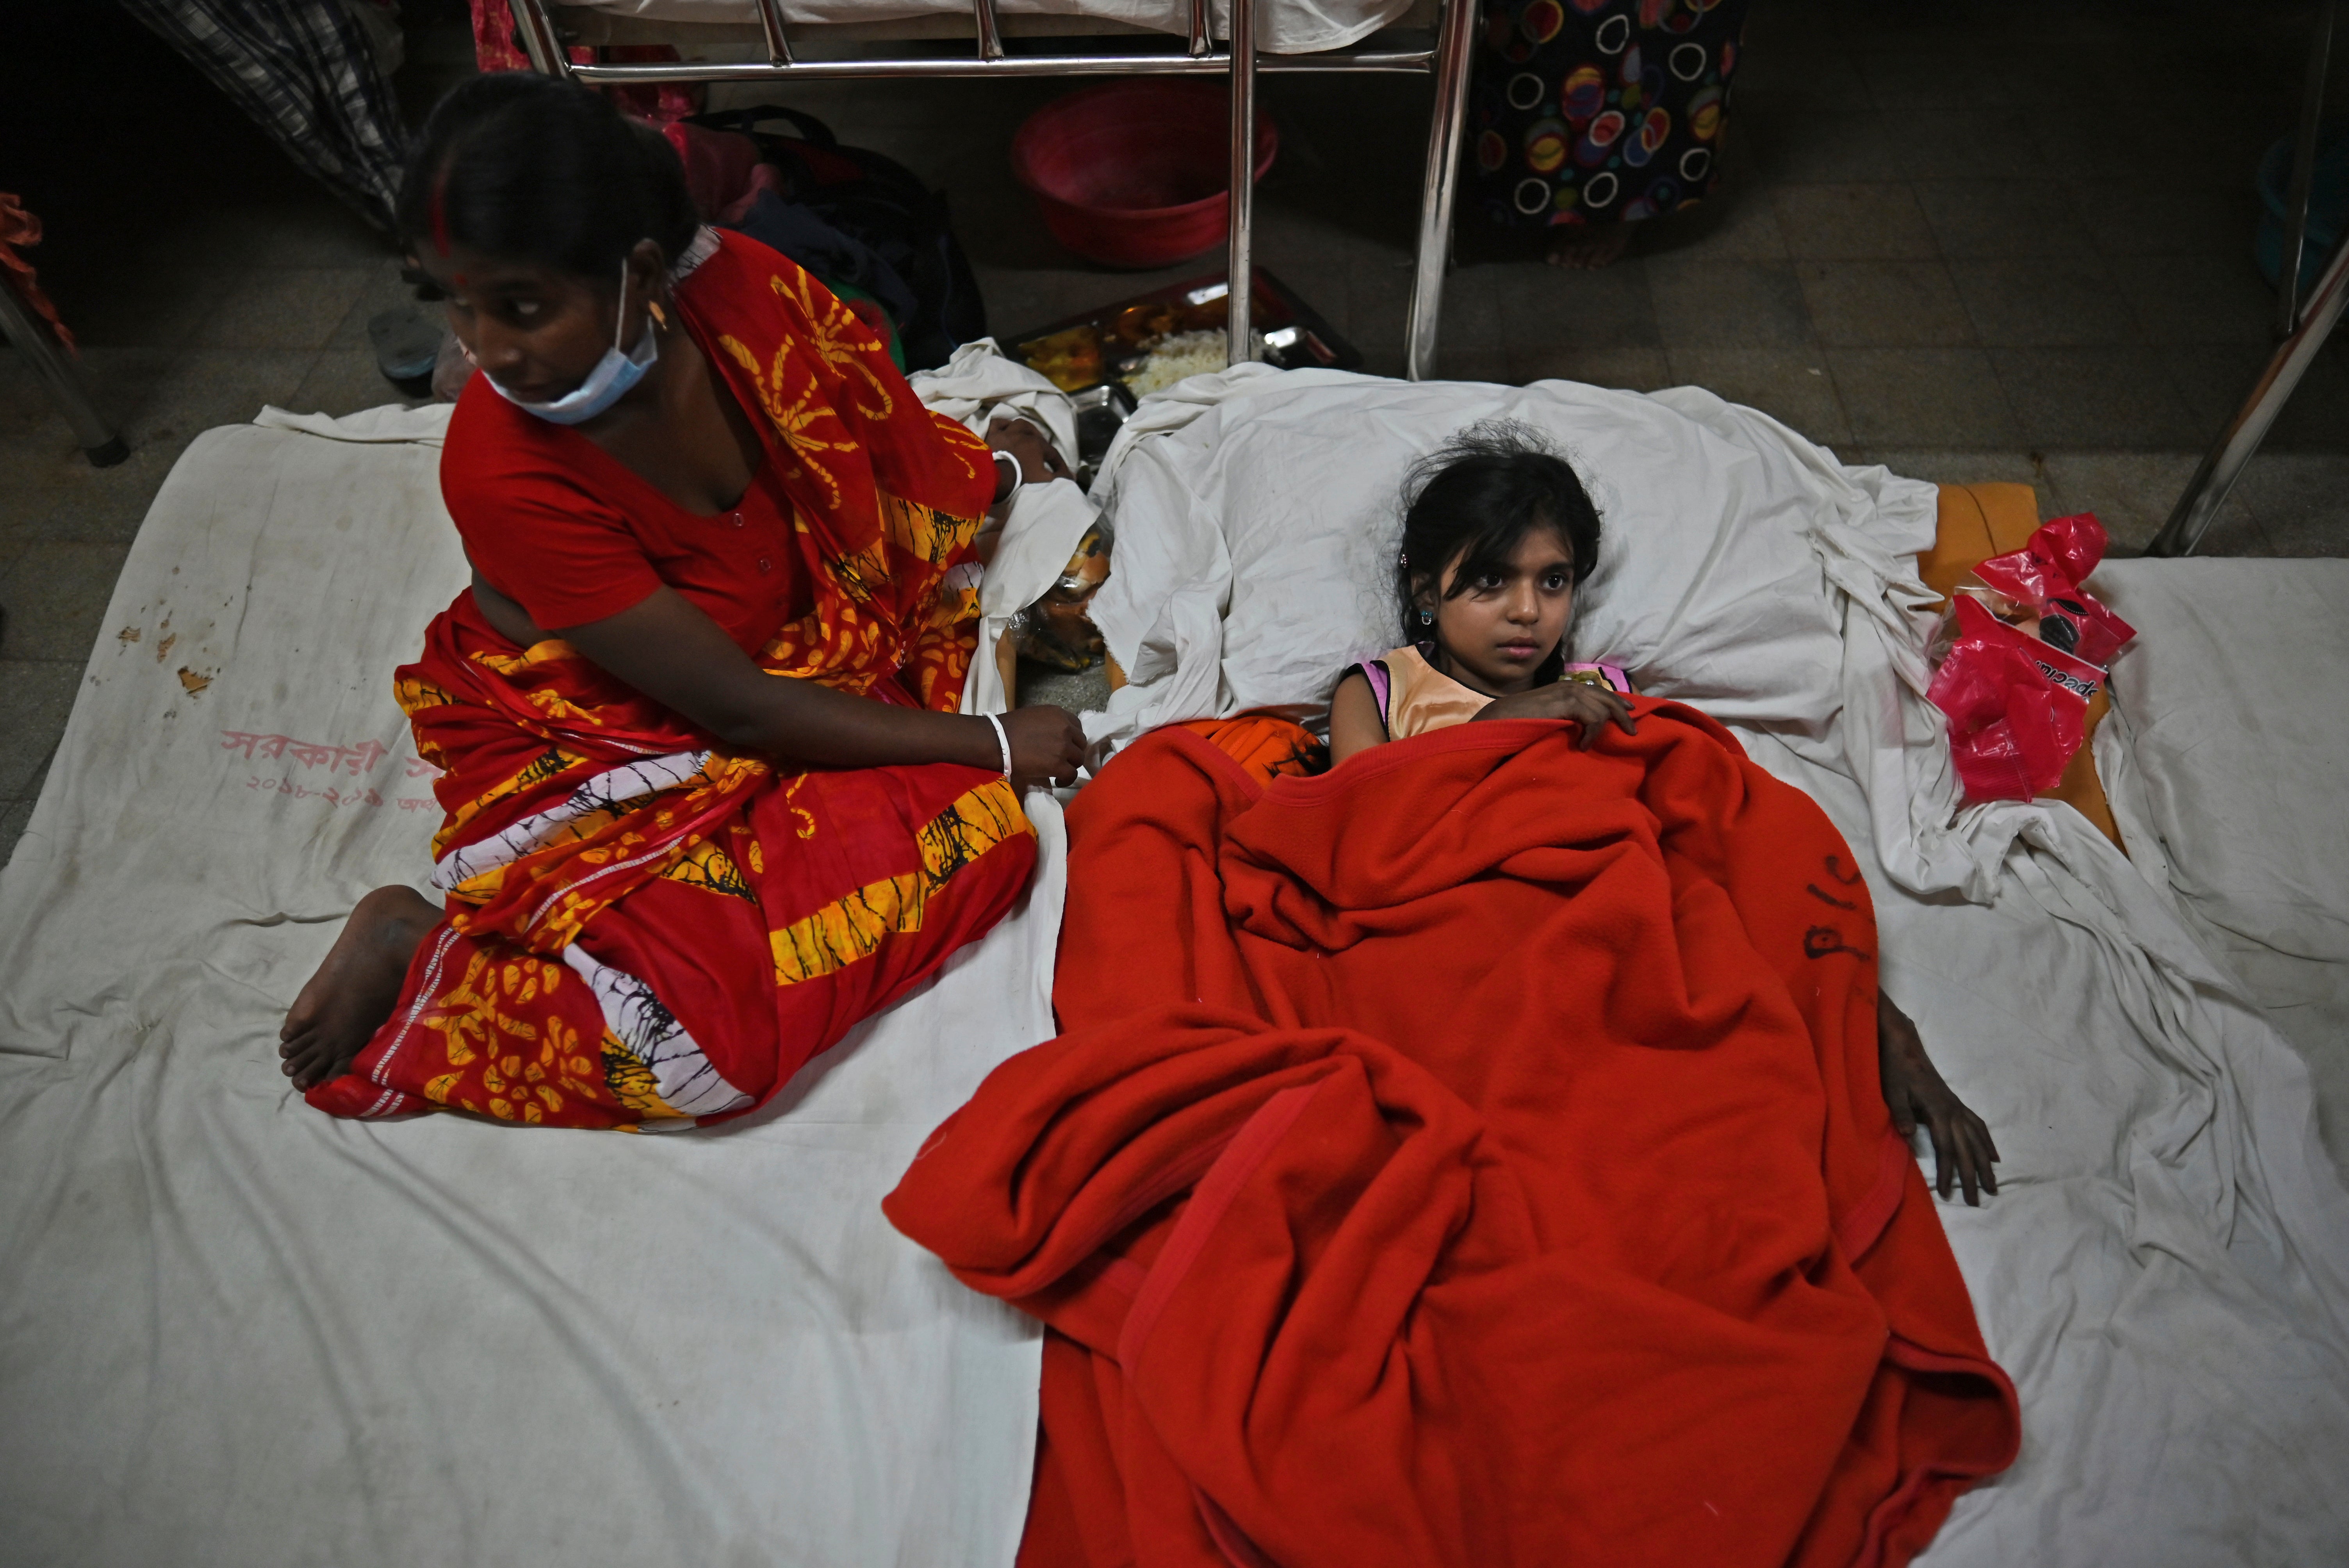 A girl rescued from the ferry fire is treated at a government medical hospital in Barishal, Bangladesh